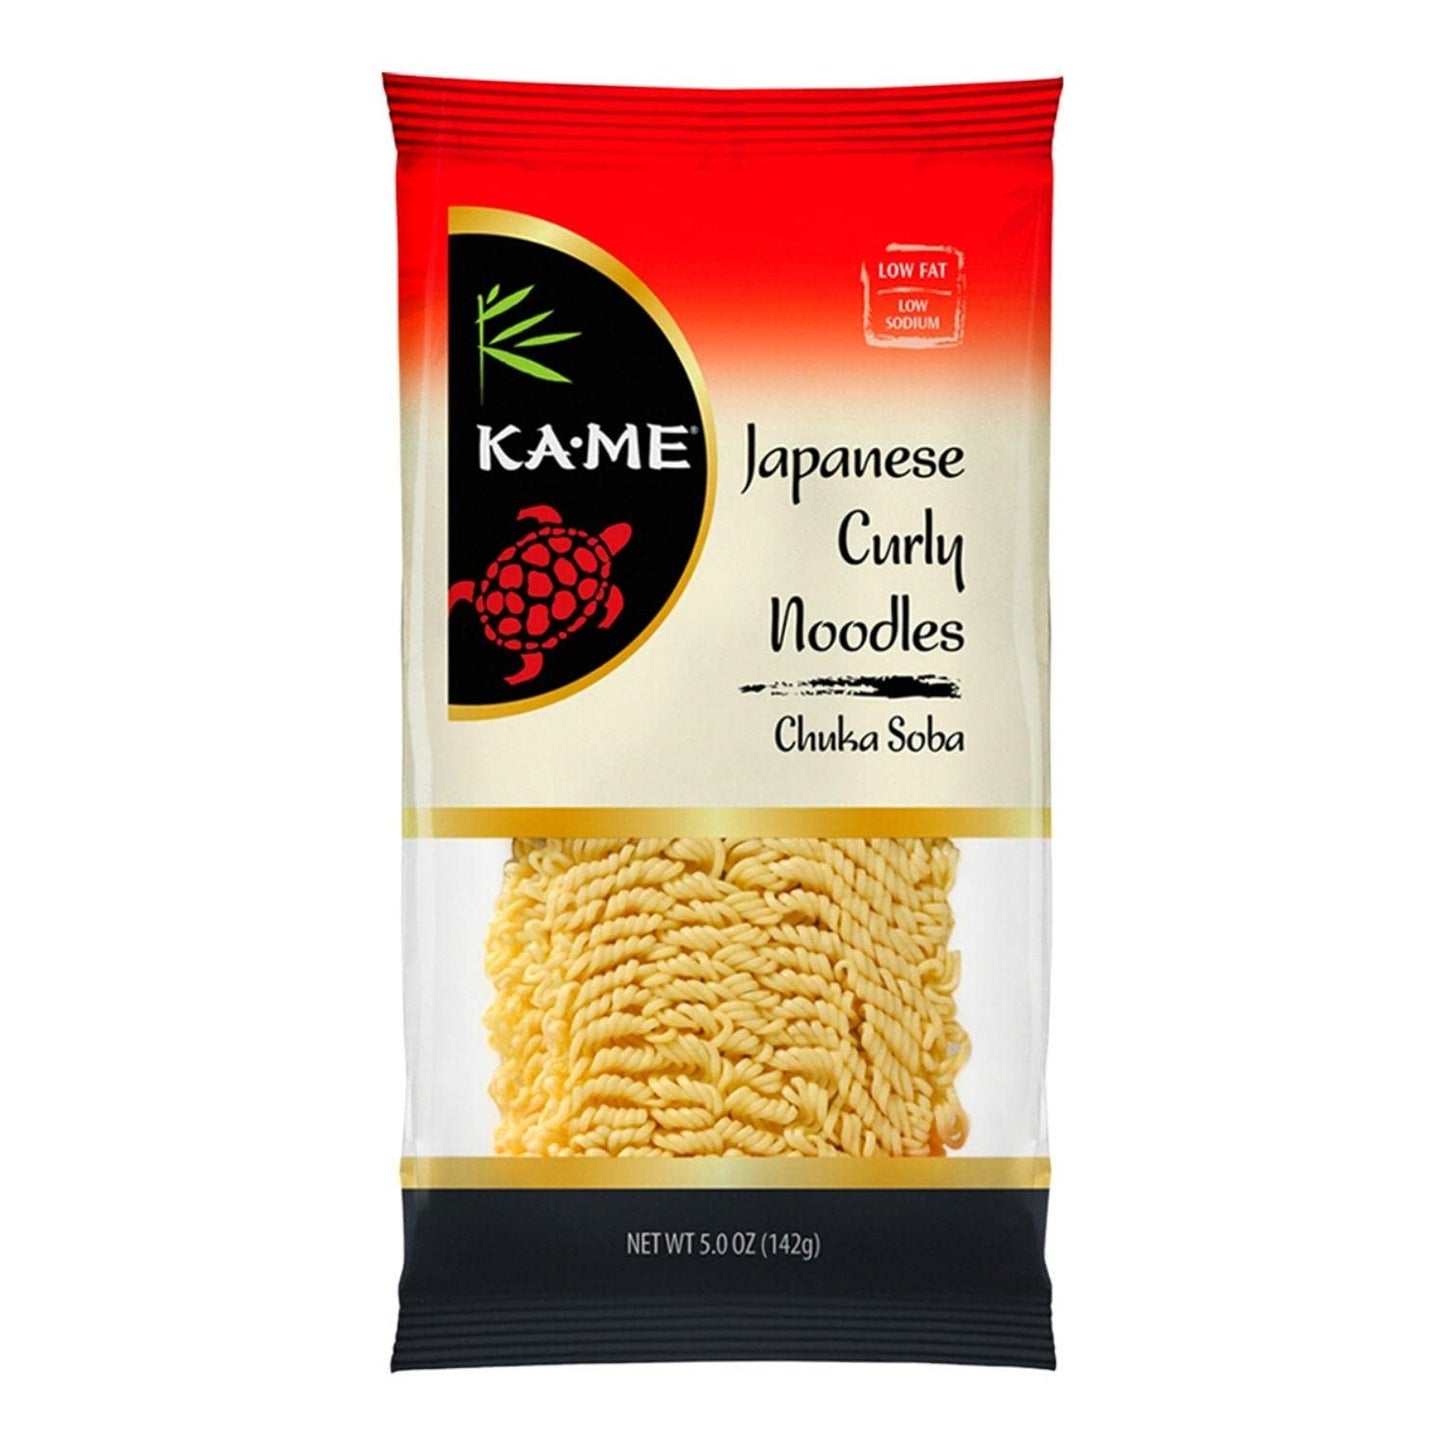 Ka-Me Japanese Ramen Noodles Pack Of 72 - Curly Chuka Soba Ramen Noodles Bulk For Delicious And Authentic Quick Meals